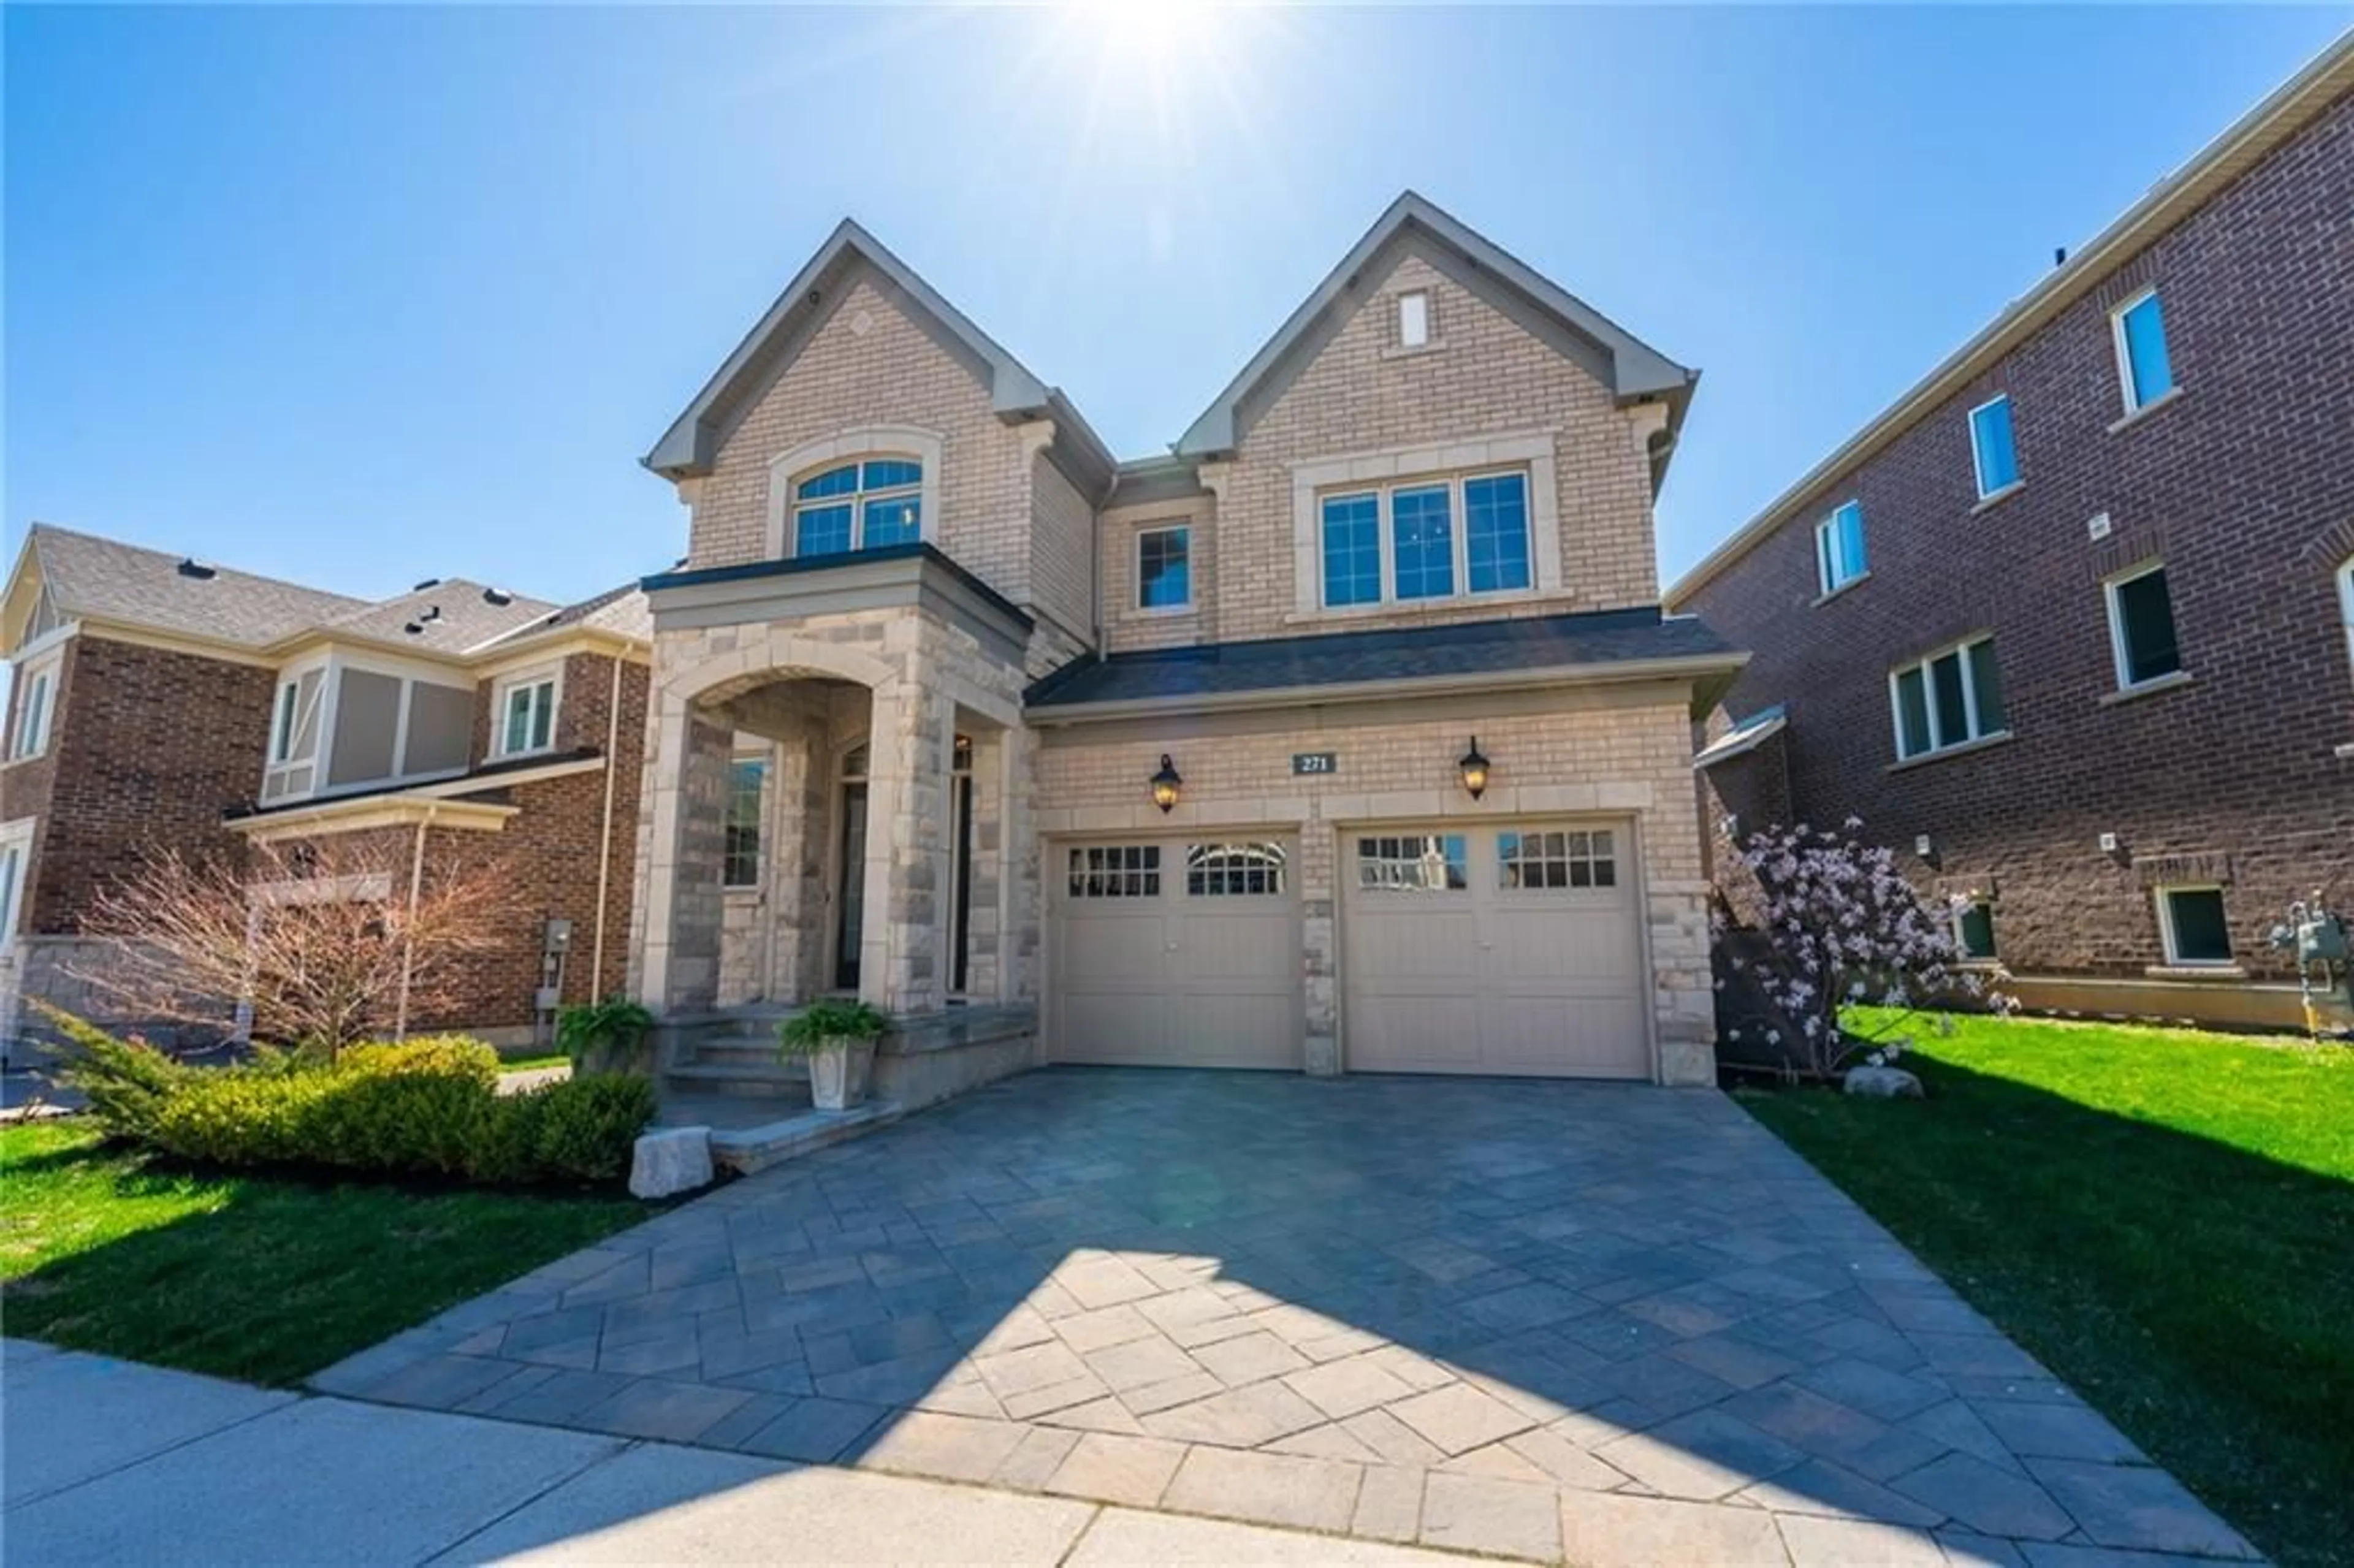 Home with brick exterior material for 271 Wisteria Way, Oakville Ontario L6M 1L3